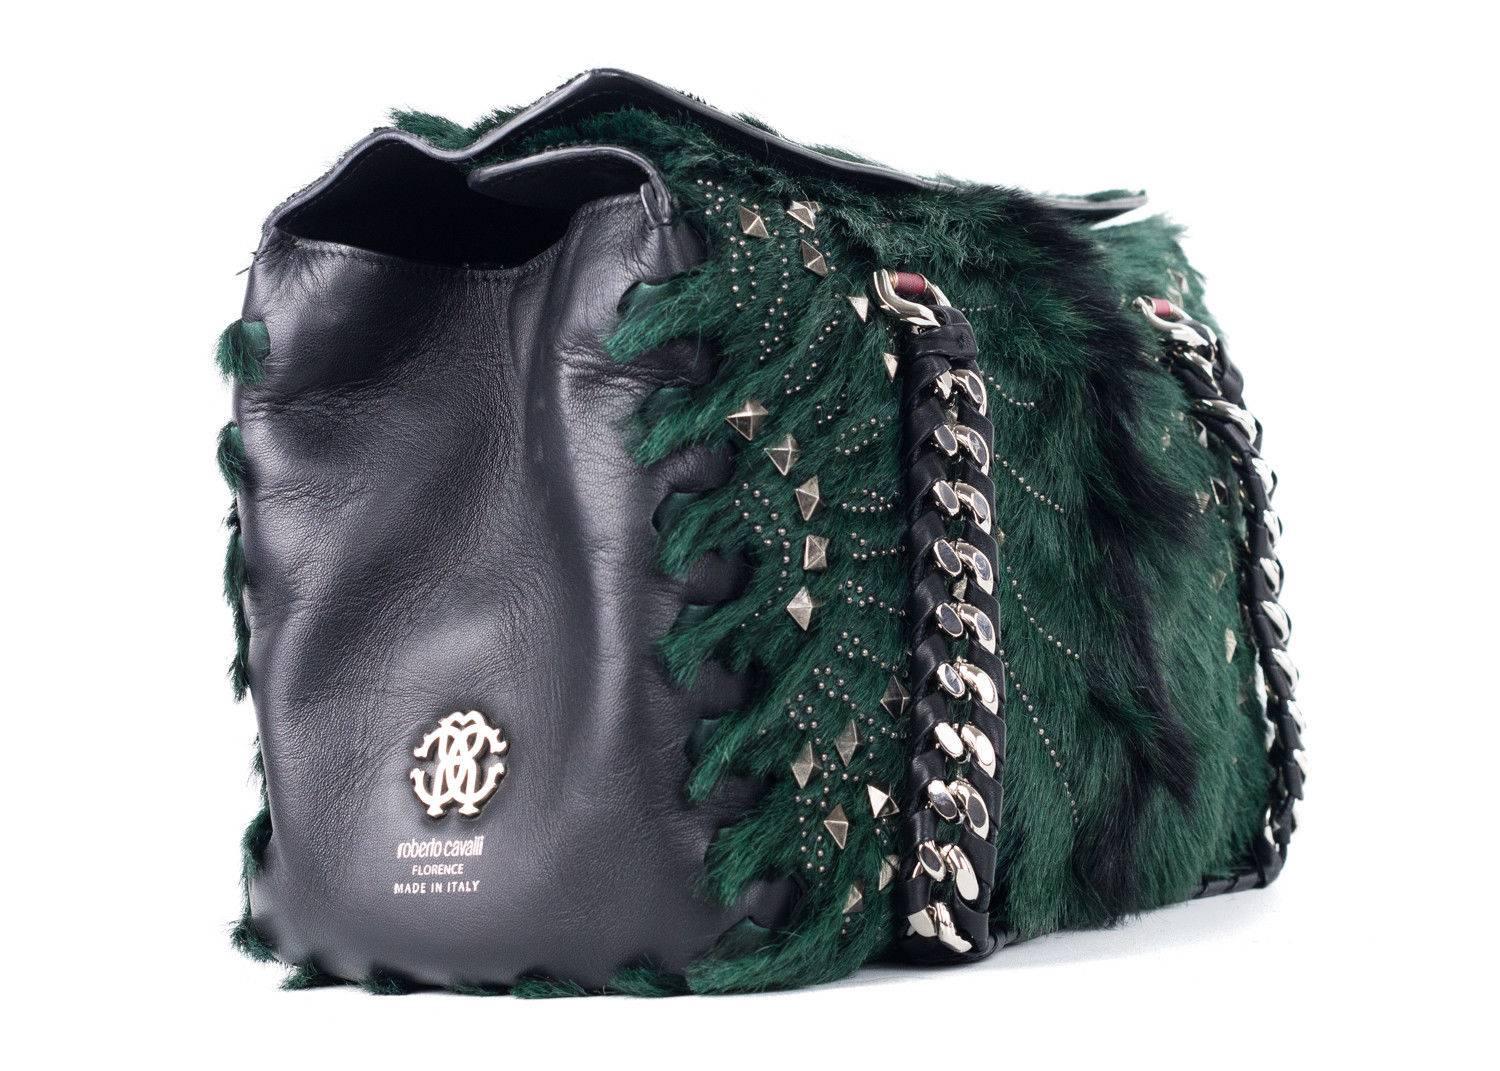 Regina Medium Green and Black Radiant Studded Satchel Bag crafted in richly dyed goat hair and lambskin leather lends a boho chic style with its soft lines and radiant pyramid and pindot studs. Featuring inlaid chain and leather handles internal zip